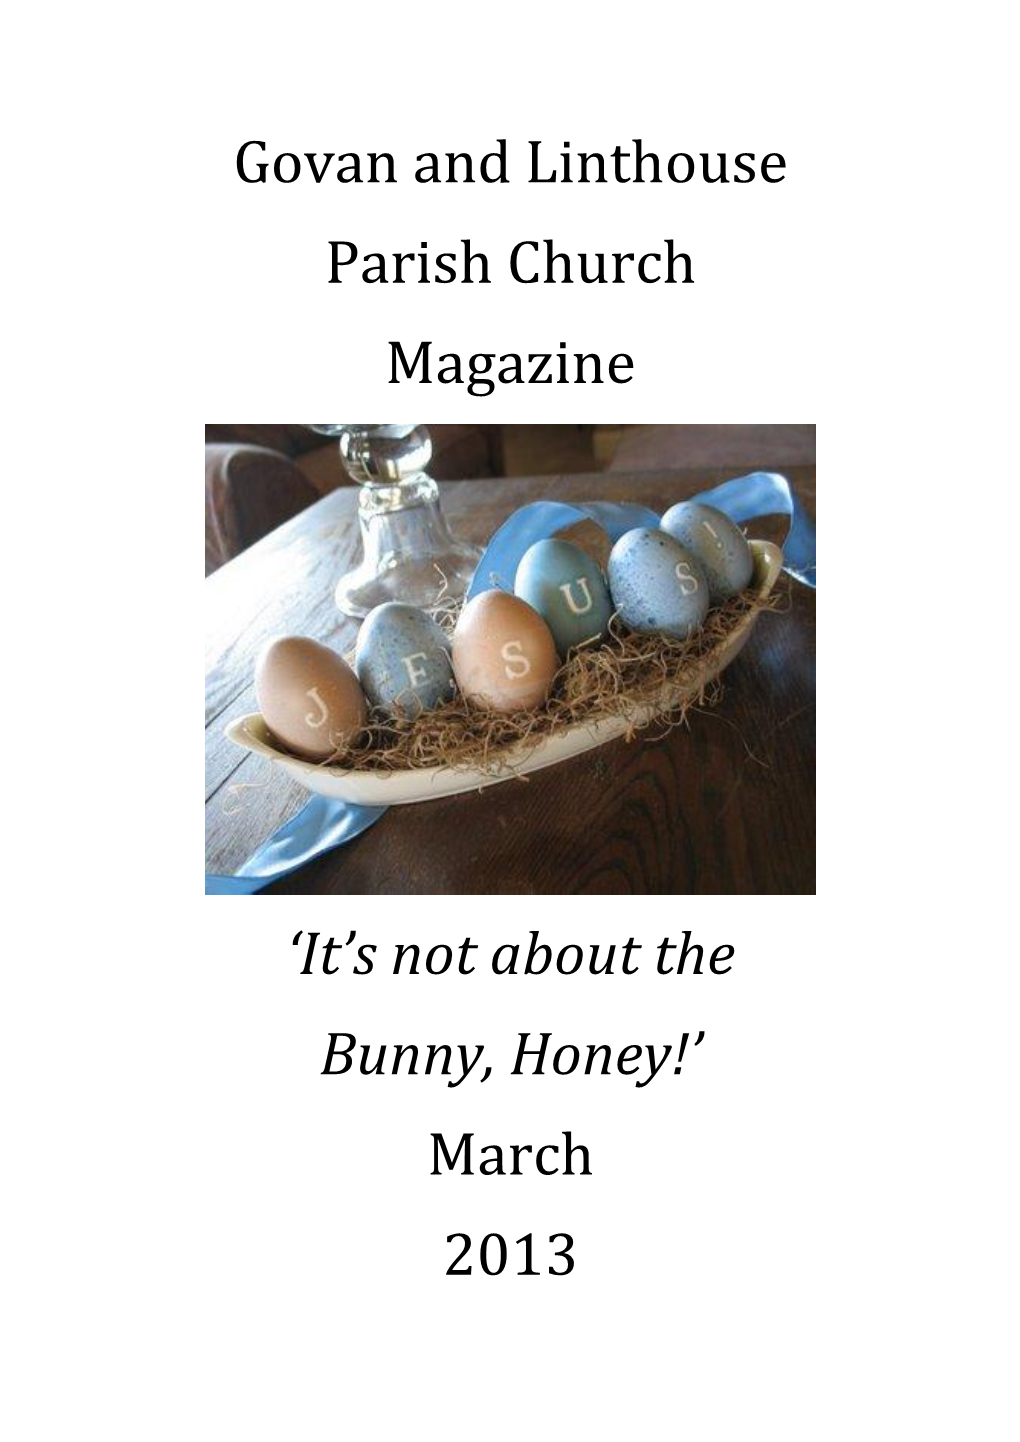 Govan and Linthouse Parish Church Magazine 'It's Not About the Bunny, Honey!' March 2013